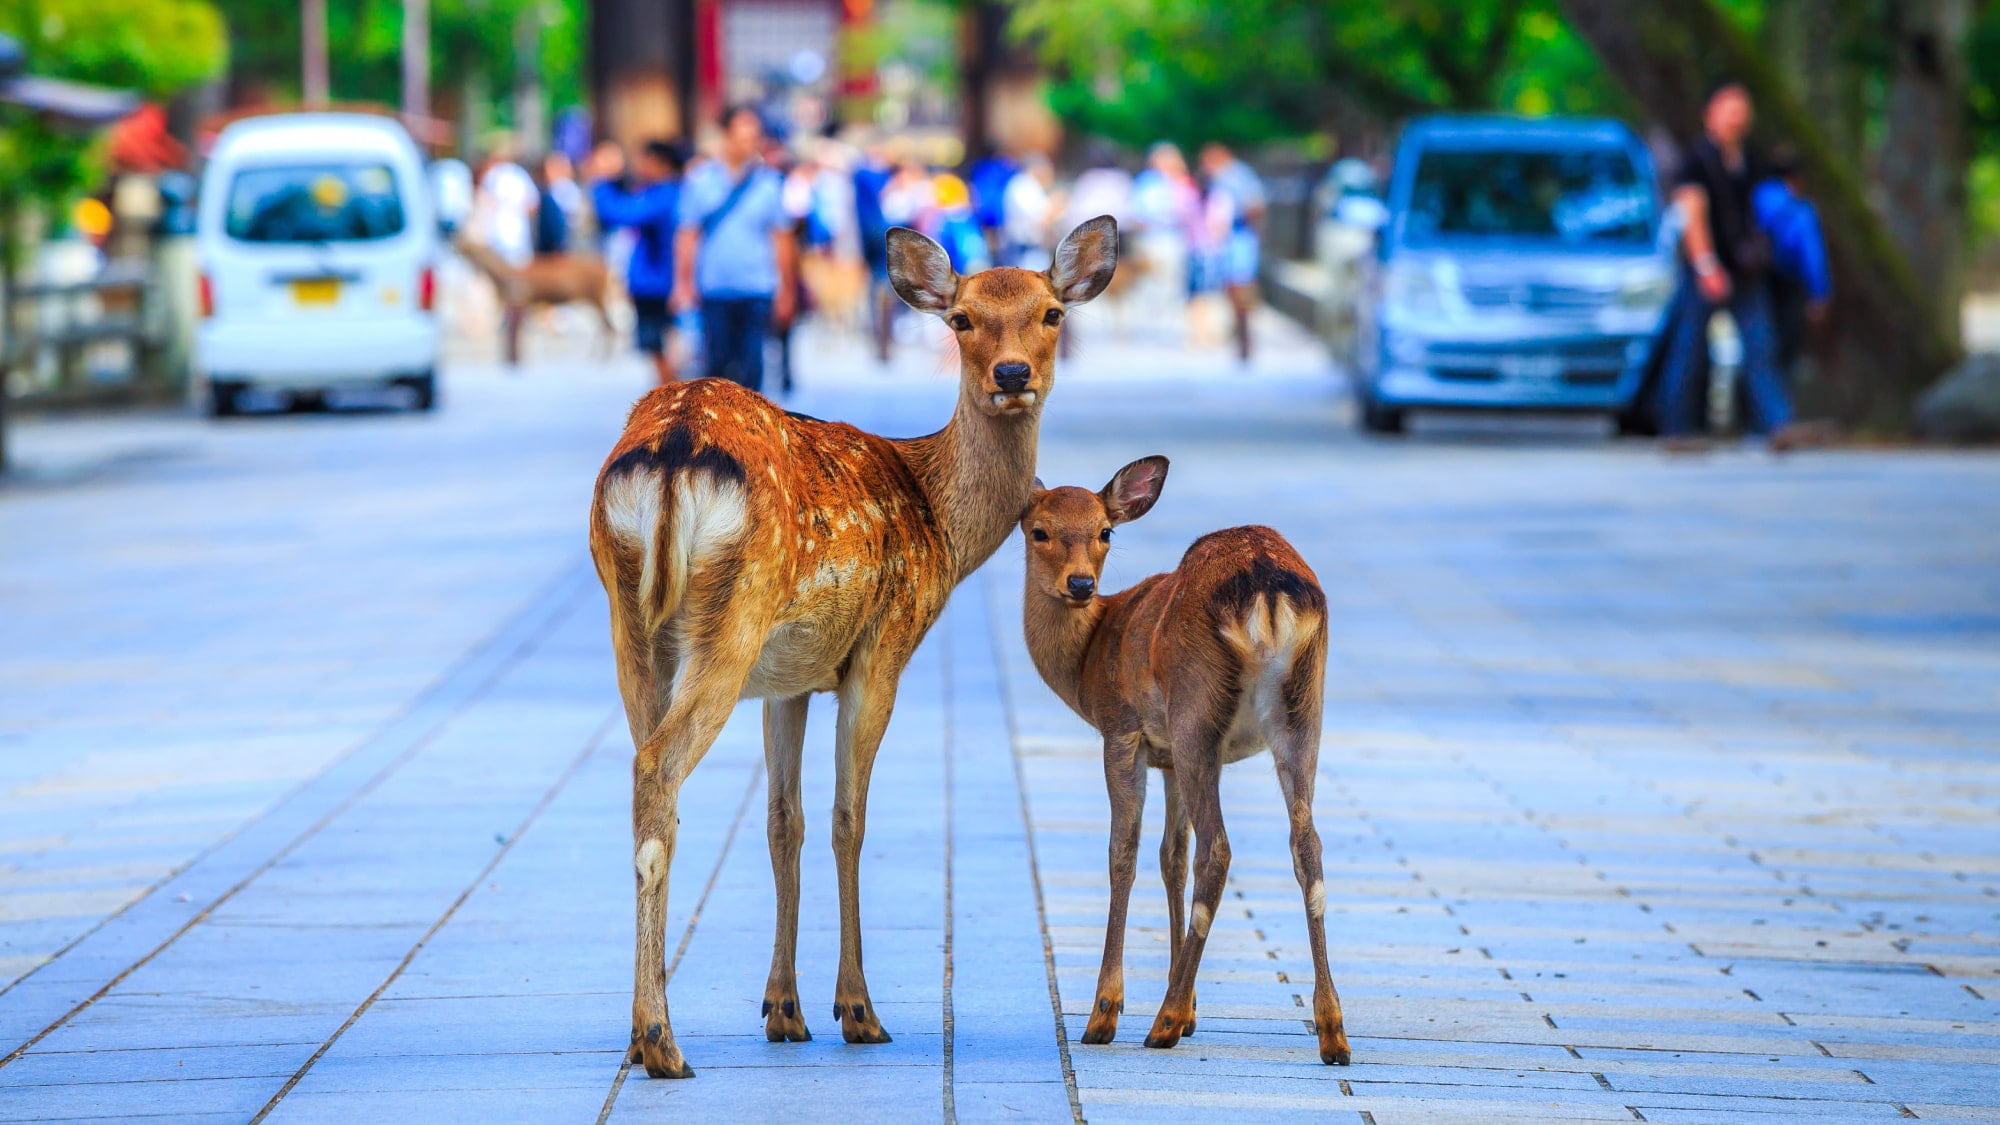 Deer in the city * Image image